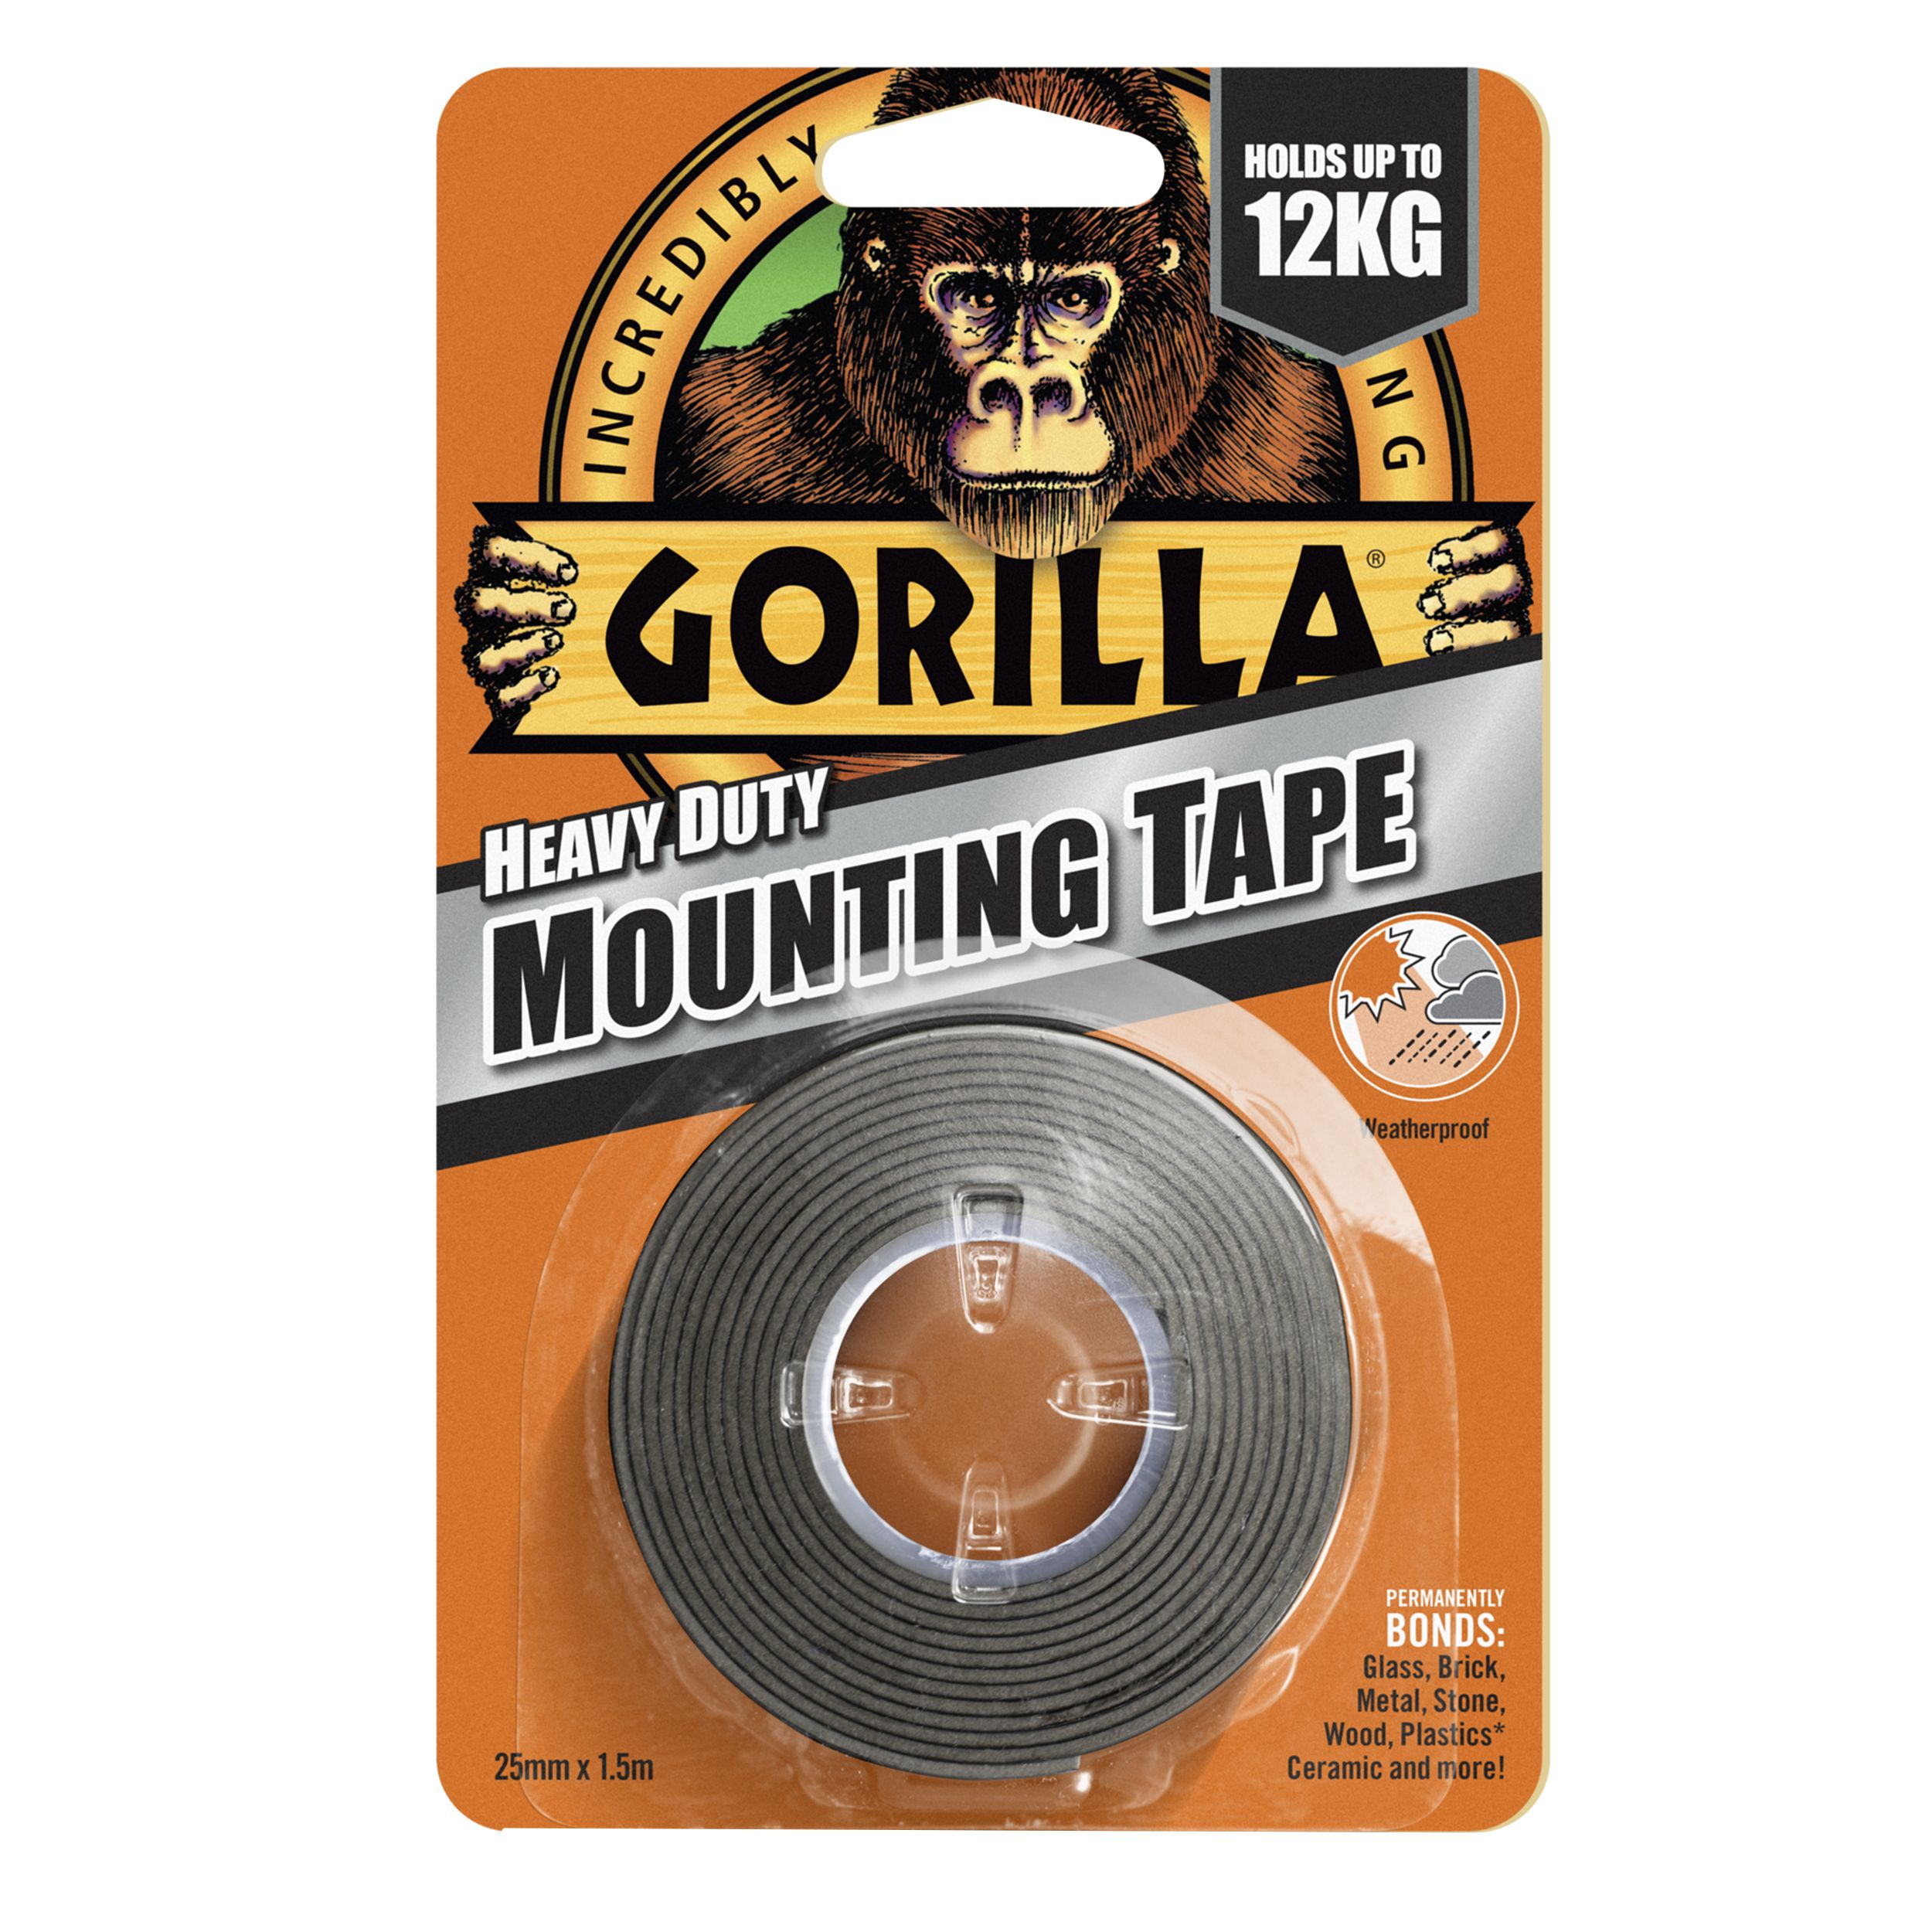 Gorilla Heavy Duty Double Sided Mounting Tape, 1 inch x 60 Inches, Black(Pack of 12) 6055016